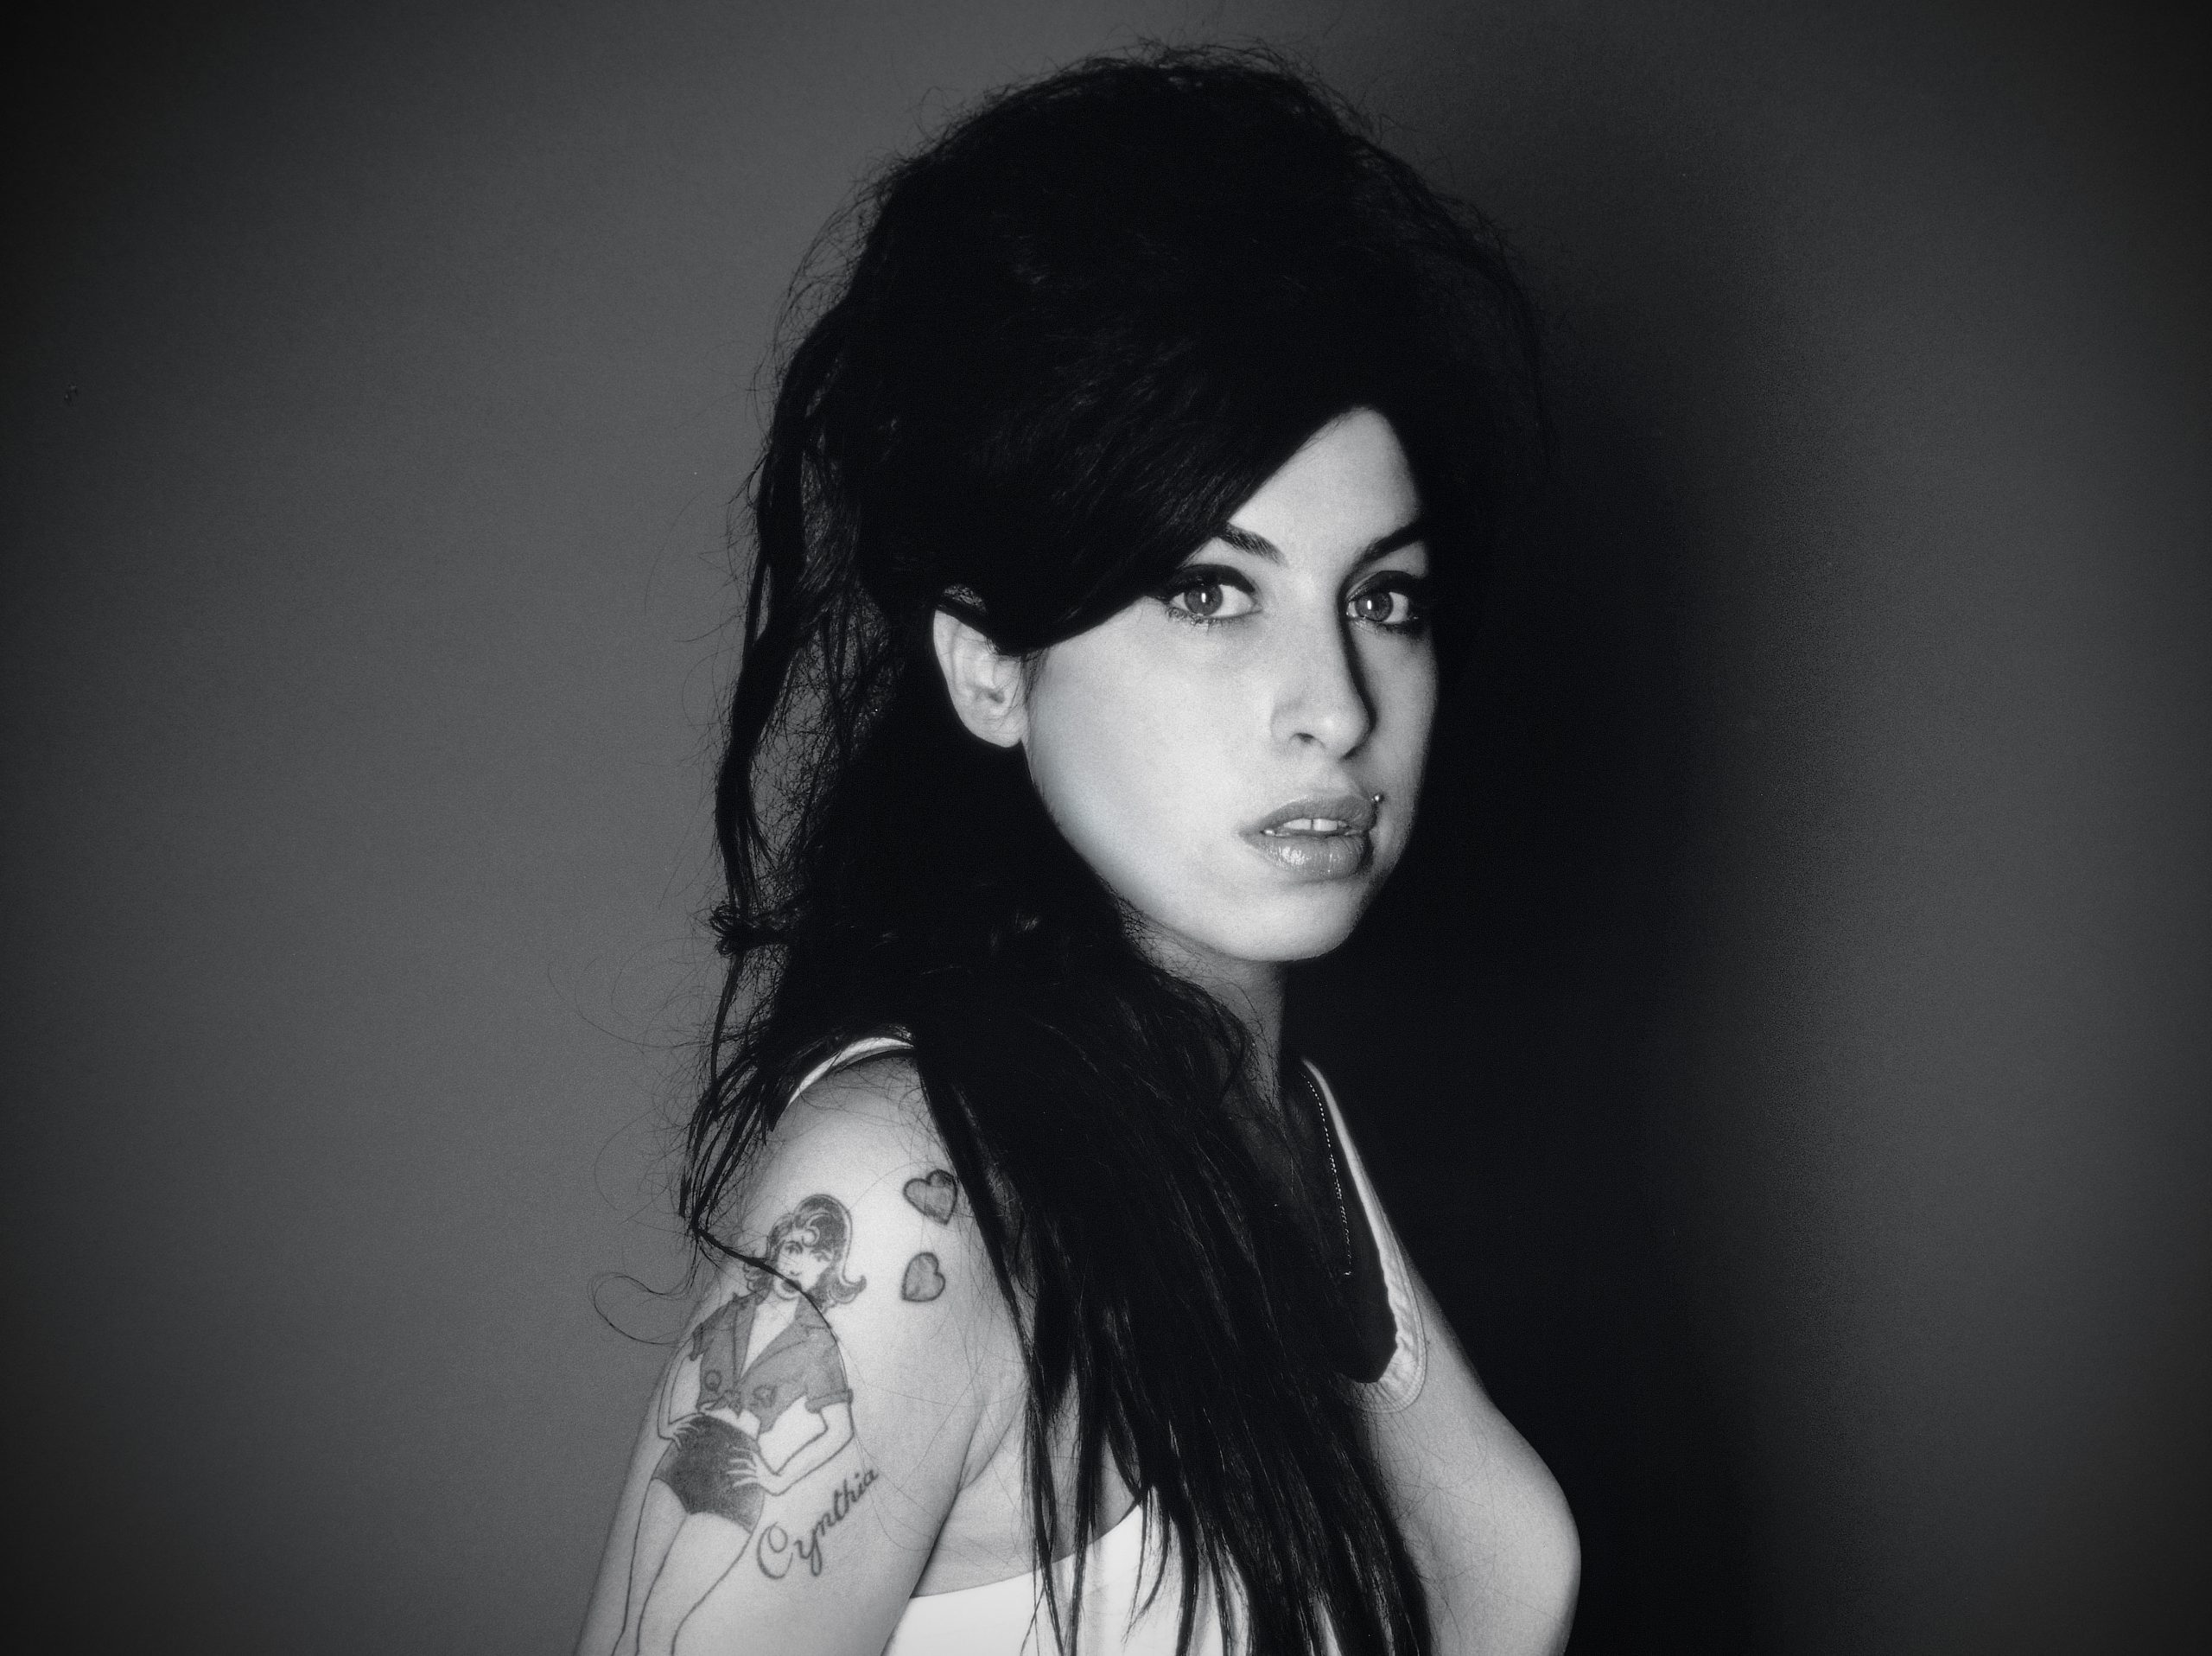 Amy Winehouse BLAG magazine shoot by Sarah J. Edwards. Amy Winehouse is pictured just before Back To Black was released